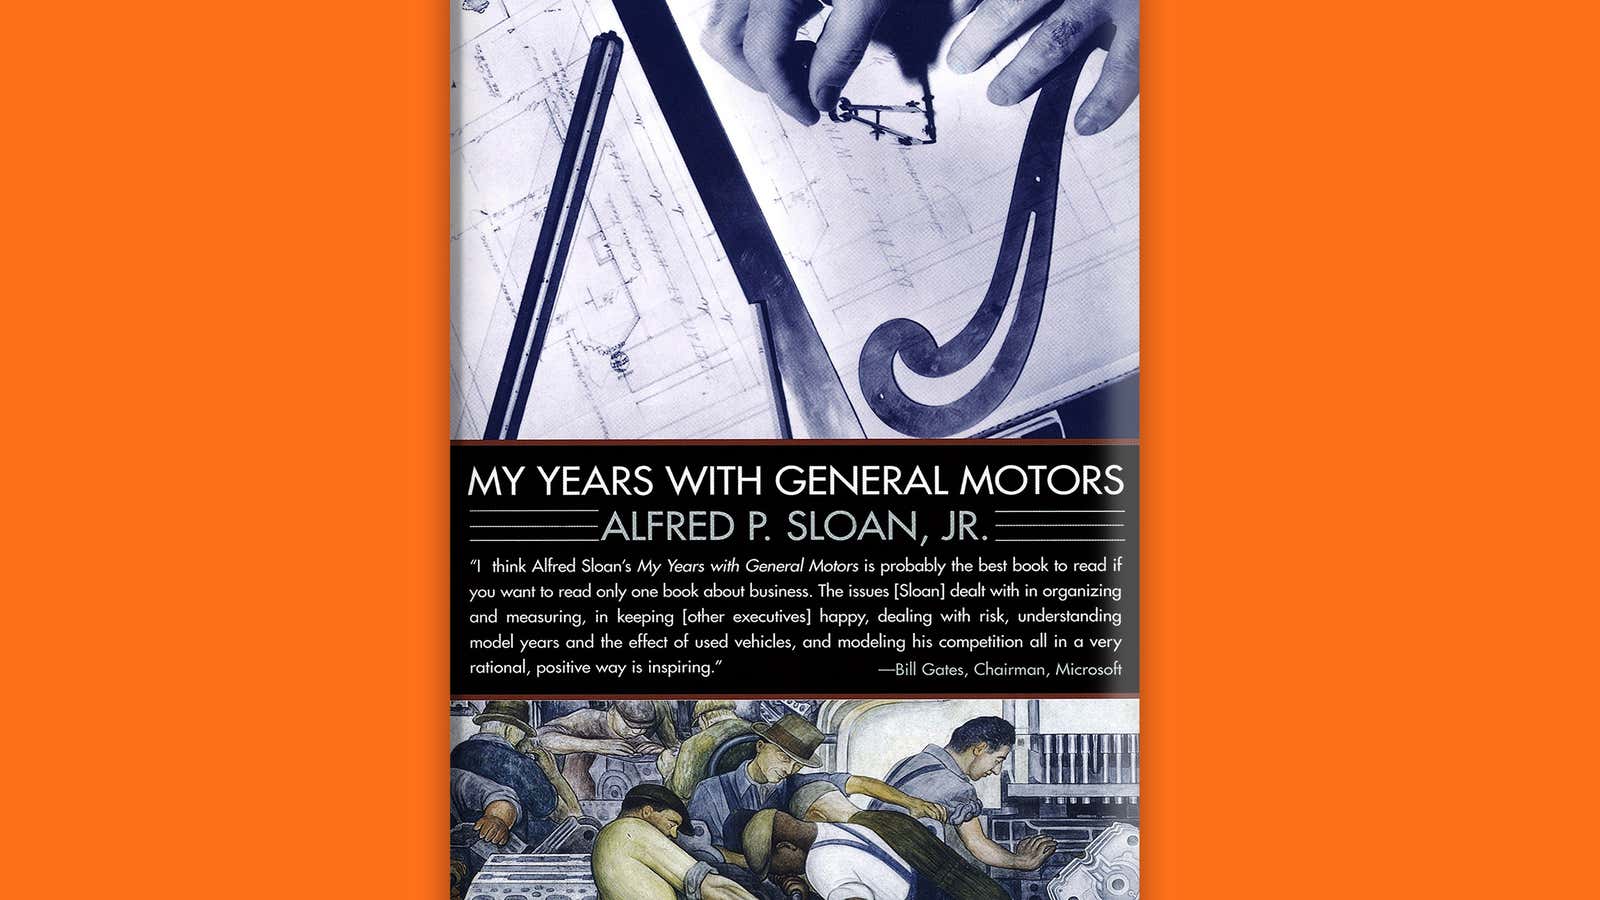 “My Years With General Motors,” by Alfred P. Sloan, Jr.